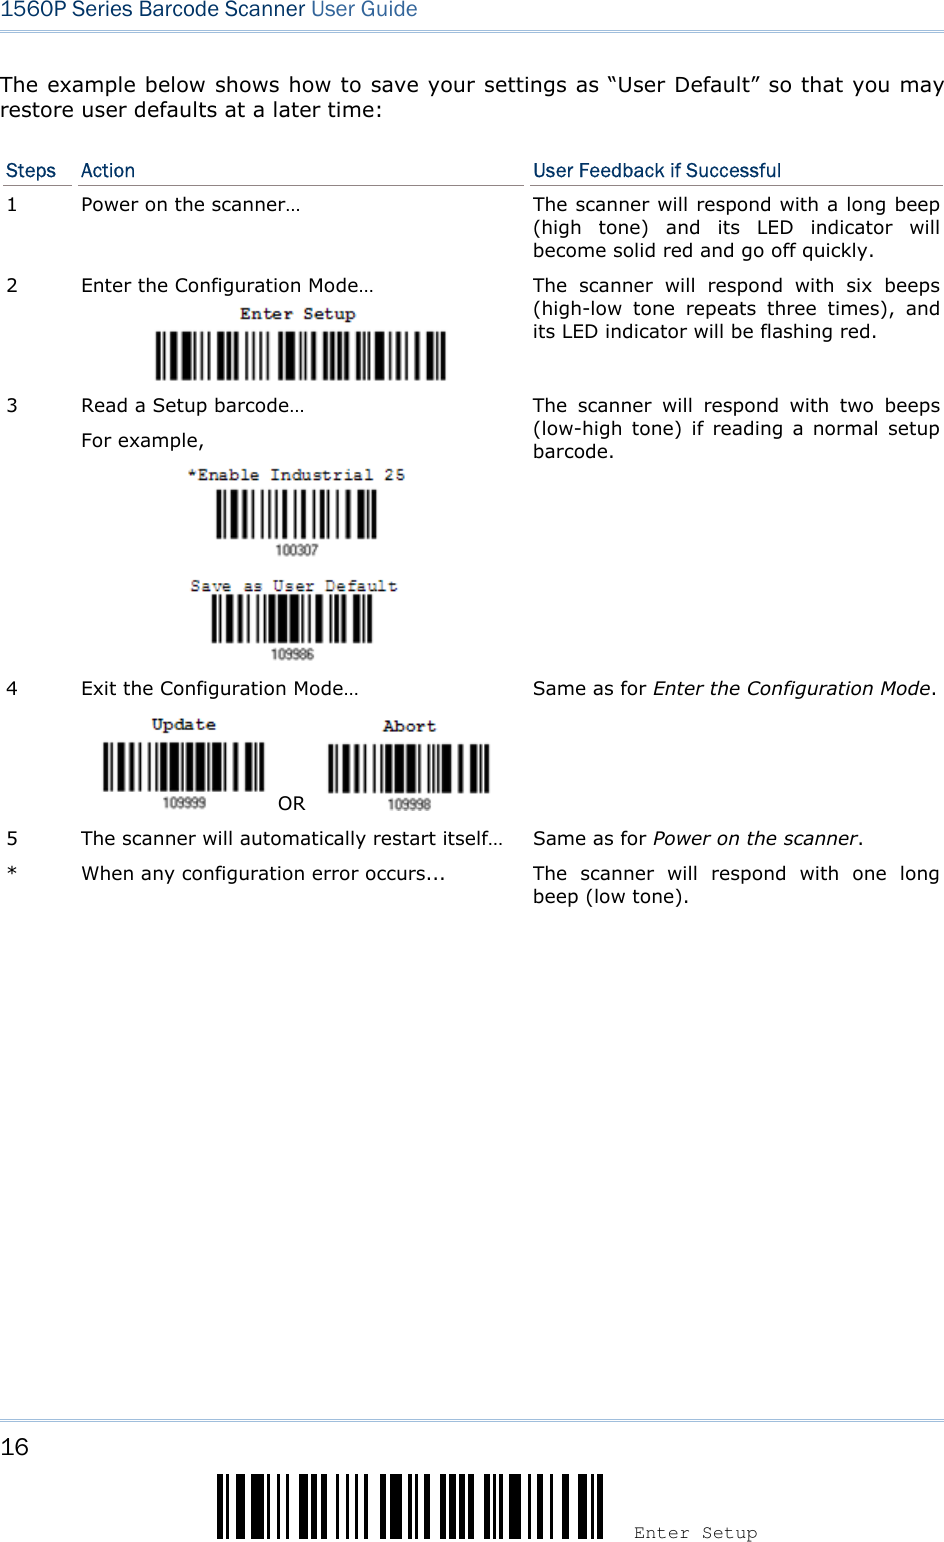 16 Enter Setup 1560P Series Barcode Scanner User Guide The example below shows how to save your settings as “User Default” so that you may restore user defaults at a later time: Steps  Action  User Feedback if Successful 1  Power on the scanner…  The scanner will respond with a long beep (high  tone)  and  its  LED  indicator  will become solid red and go off quickly. 2  Enter the Configuration Mode… The  scanner  will  respond  with  six  beeps (high-low  tone  repeats  three  times),  and its LED indicator will be flashing red. 3  Read a Setup barcode… For example, The  scanner  will  respond  with  two  beeps (low-high  tone)  if  reading  a normal  setup barcode. 4  Exit the Configuration Mode…   OR   Same as for Enter the Configuration Mode. 5  The scanner will automatically restart itself…  Same as for Power on the scanner. *  When any configuration error occurs... The  scanner  will  respond  with  one  long beep (low tone). 